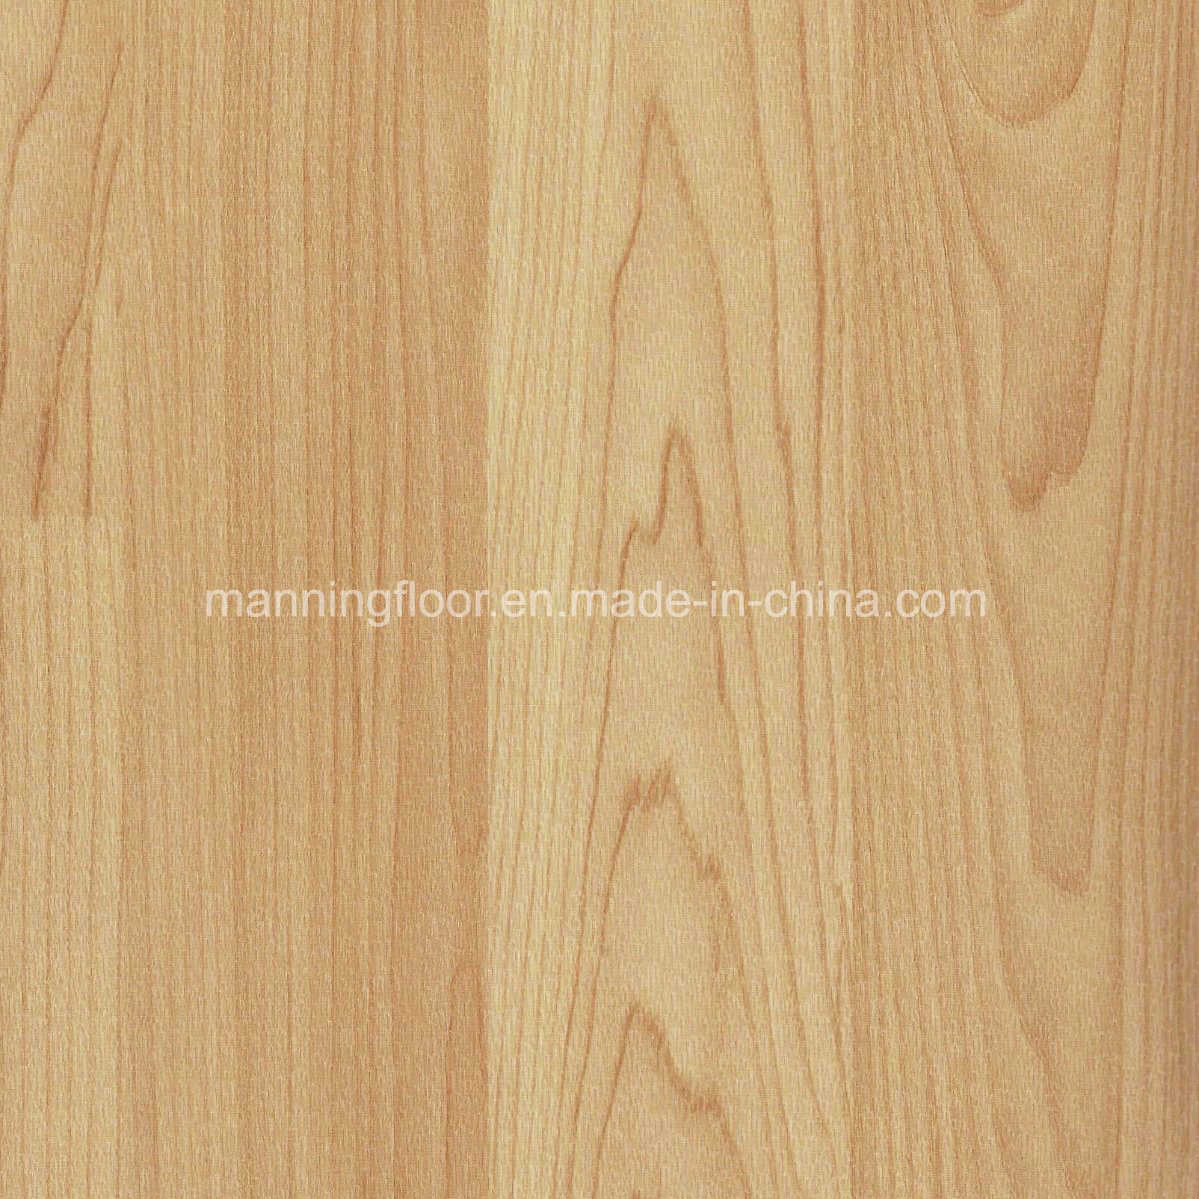 PVC Sports Flooring for Indoor Basketball Wood Pattern-4.5mm Thick Hj6819